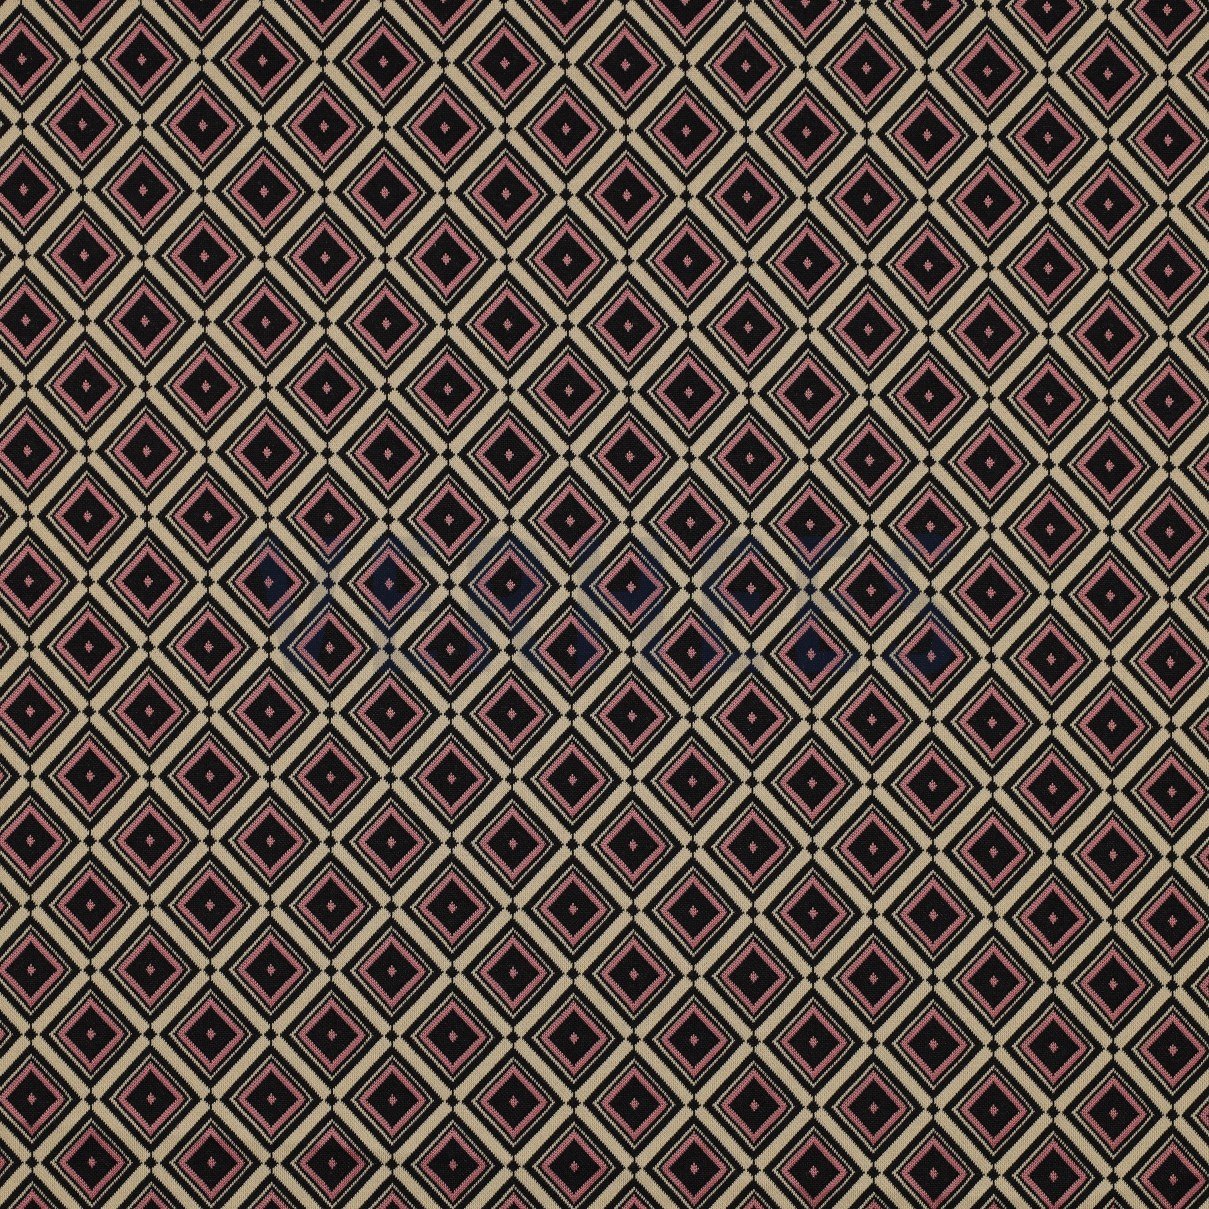 KNITTED JACQUARD MULTI BEIGE (high resolution)